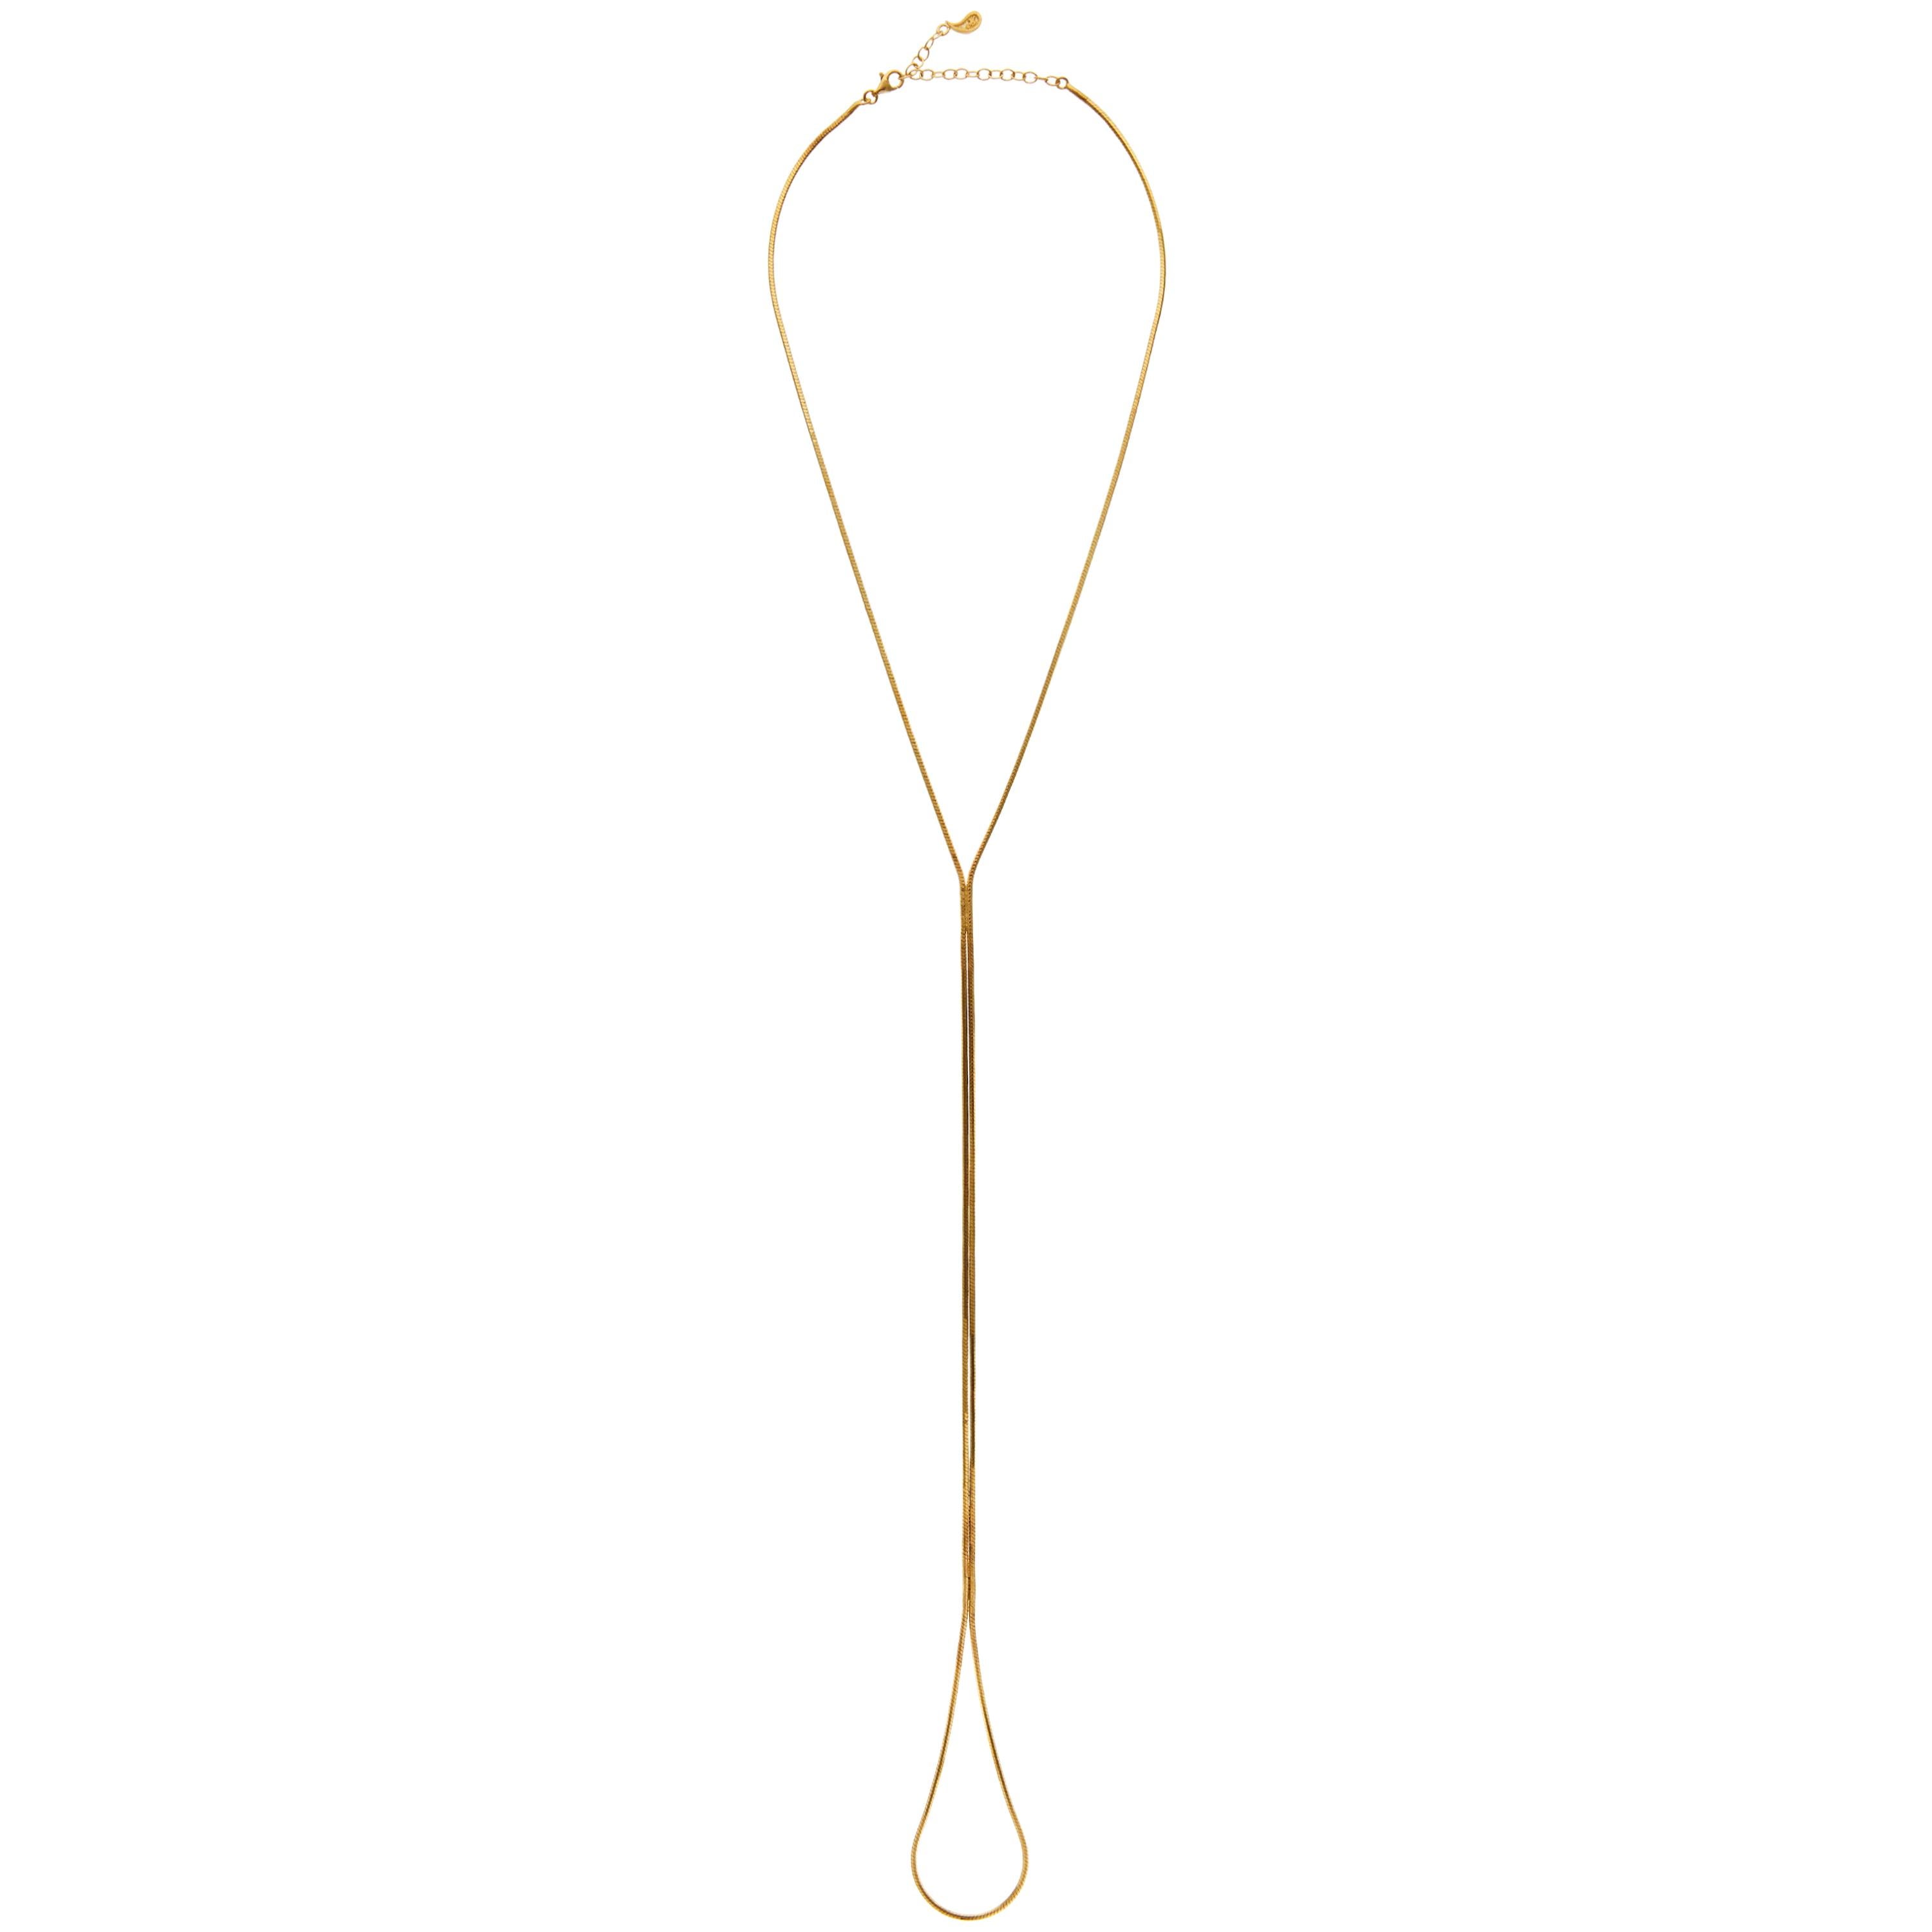  Necklace Lariat  Snake Chain Minimal Long  Liquid 18K Gold-Plated Greek Jewelry